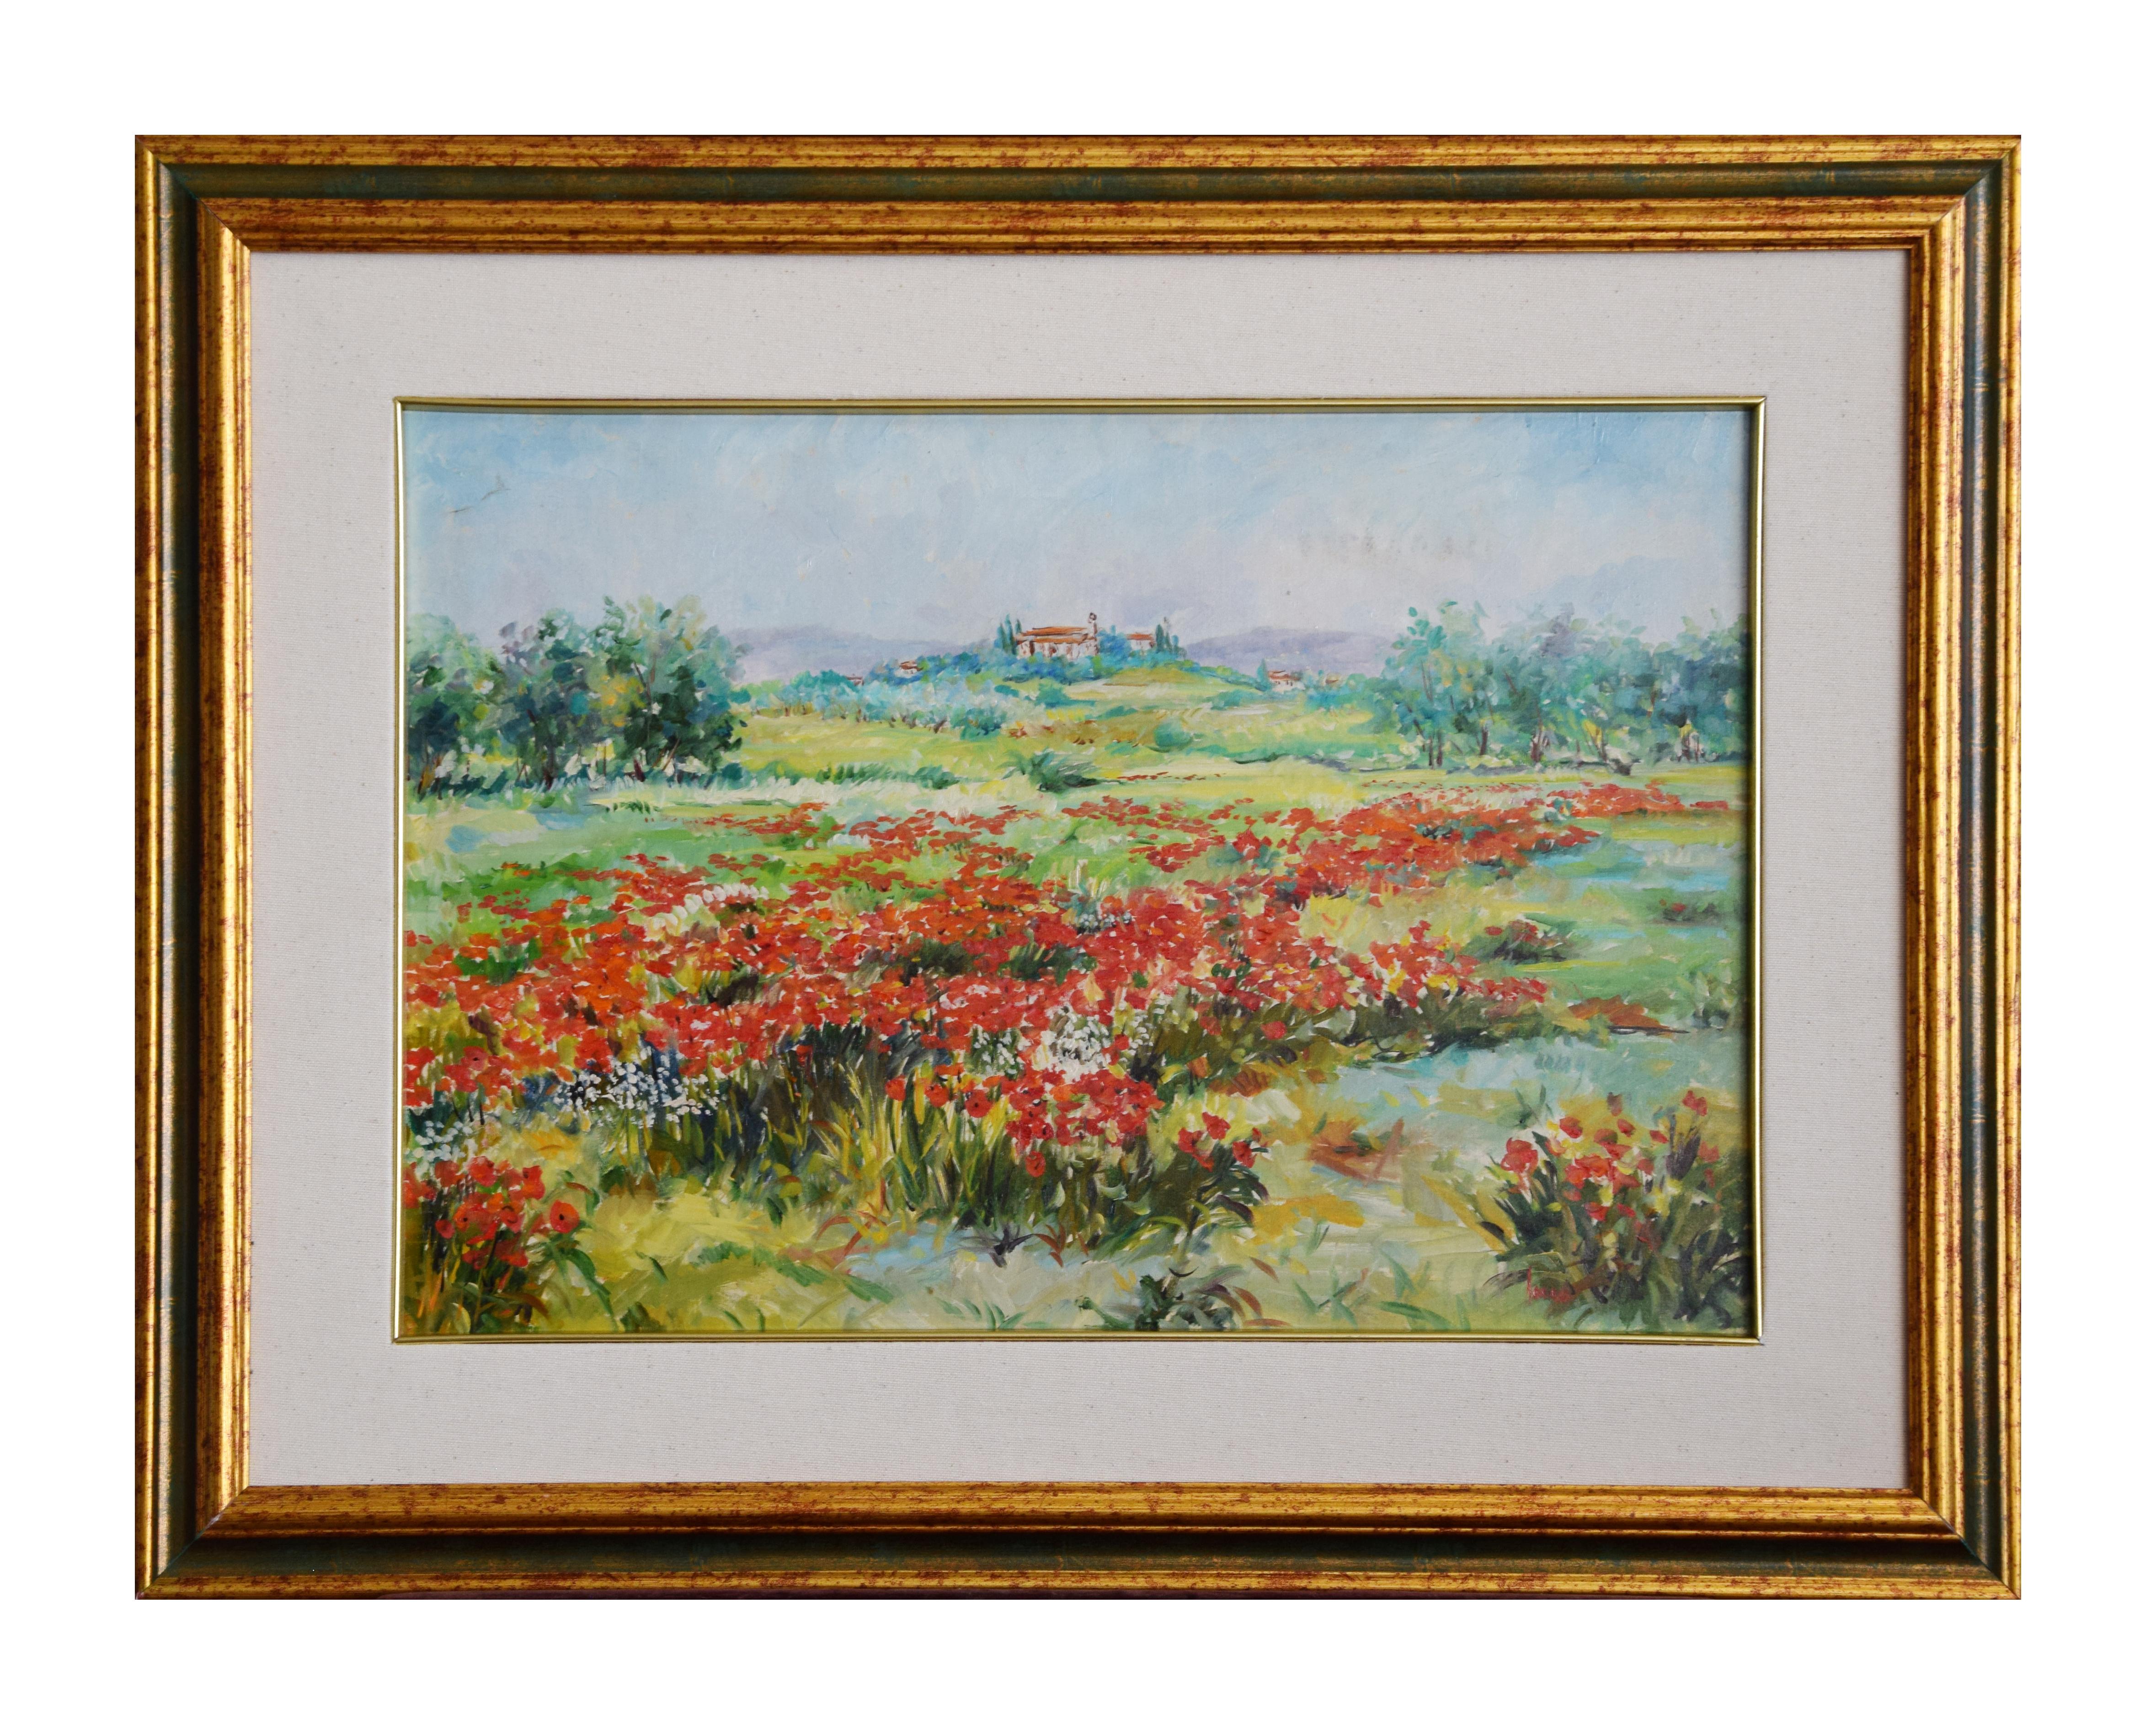 L'Abbazia is a beautiful oil painting on canvas realized by the Italian contemporary artist Luciano Sacco. Including frame (53 x 68 cm). Hand-signed by the artist on the lower right.

Reference: Luciano Sacco, I colori della natura, Casa D'Arte